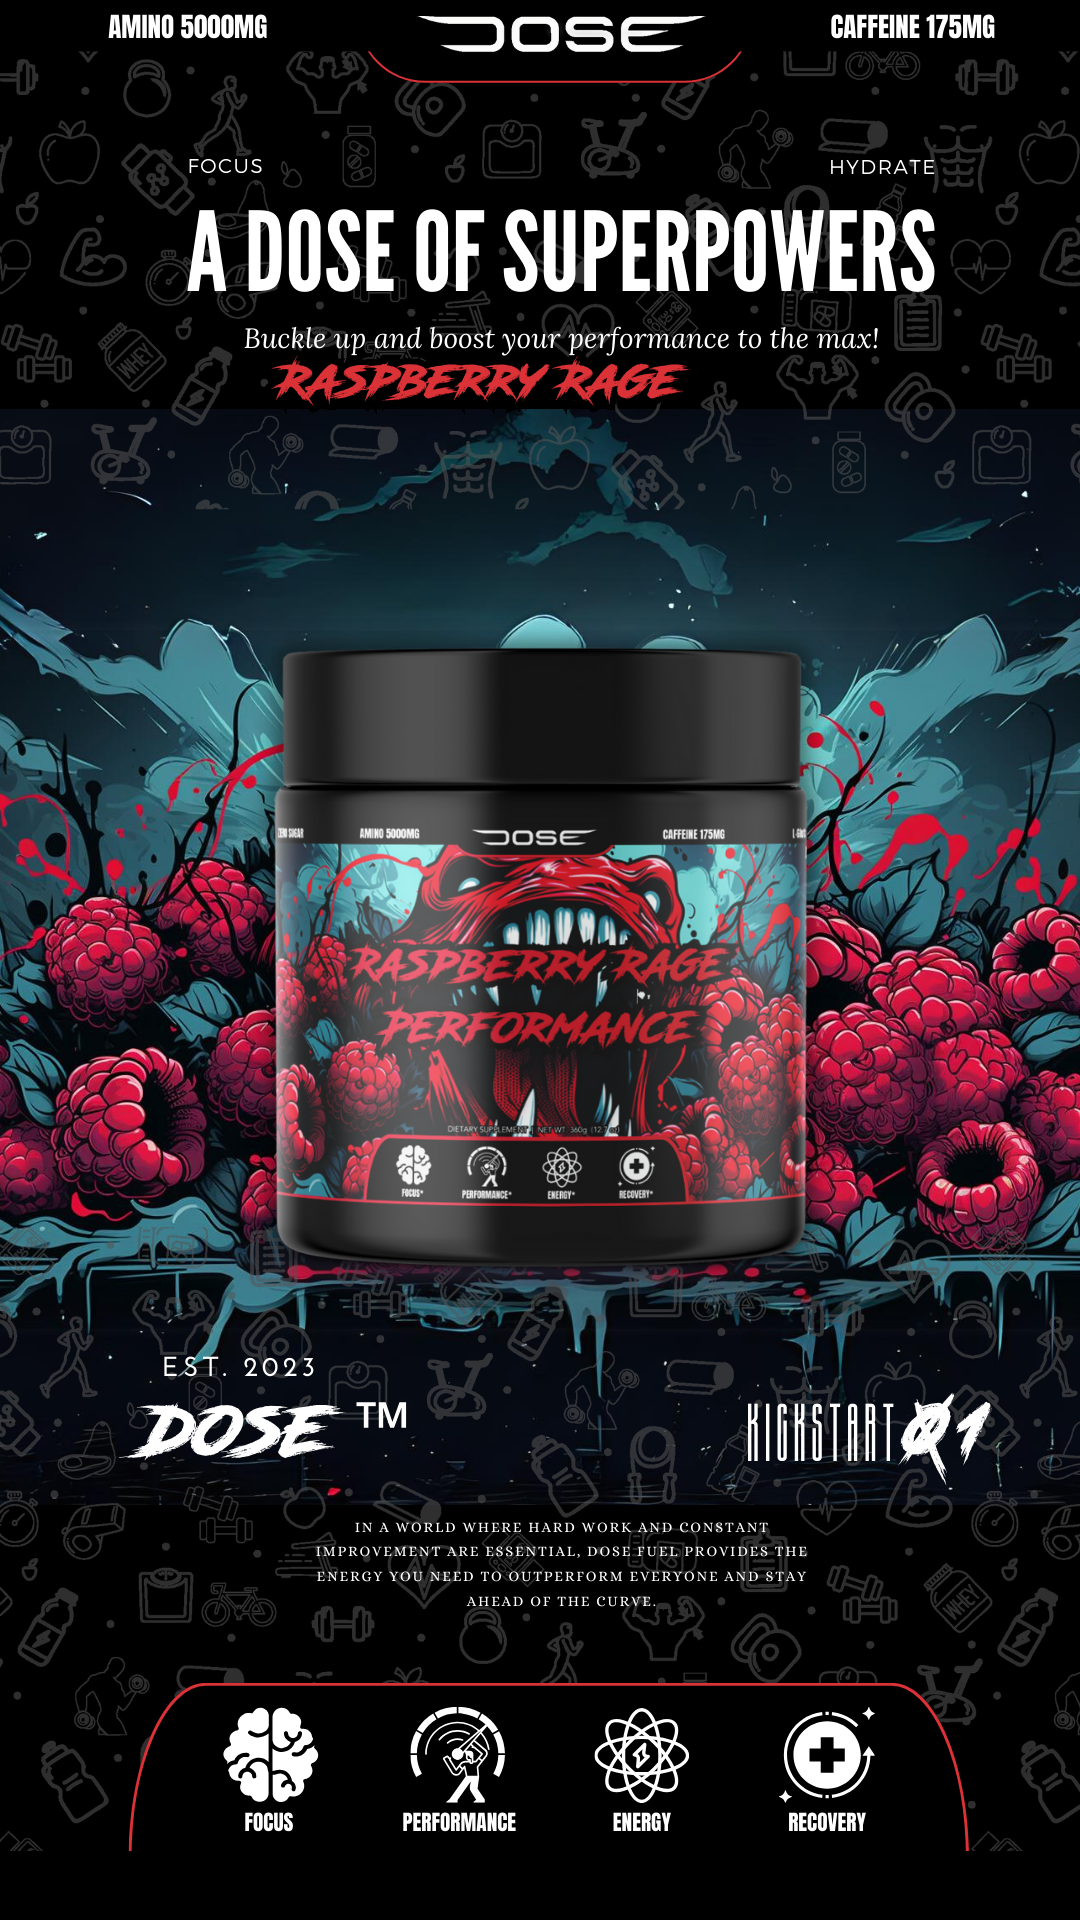 Dose Fuel Raspberry Rage Performance Pre-Workout Supplement - A Dose of Superpowers, 5000mg Amino Blend, 175mg Caffeine, Boost Performance, Focus, Energy, and Recovery